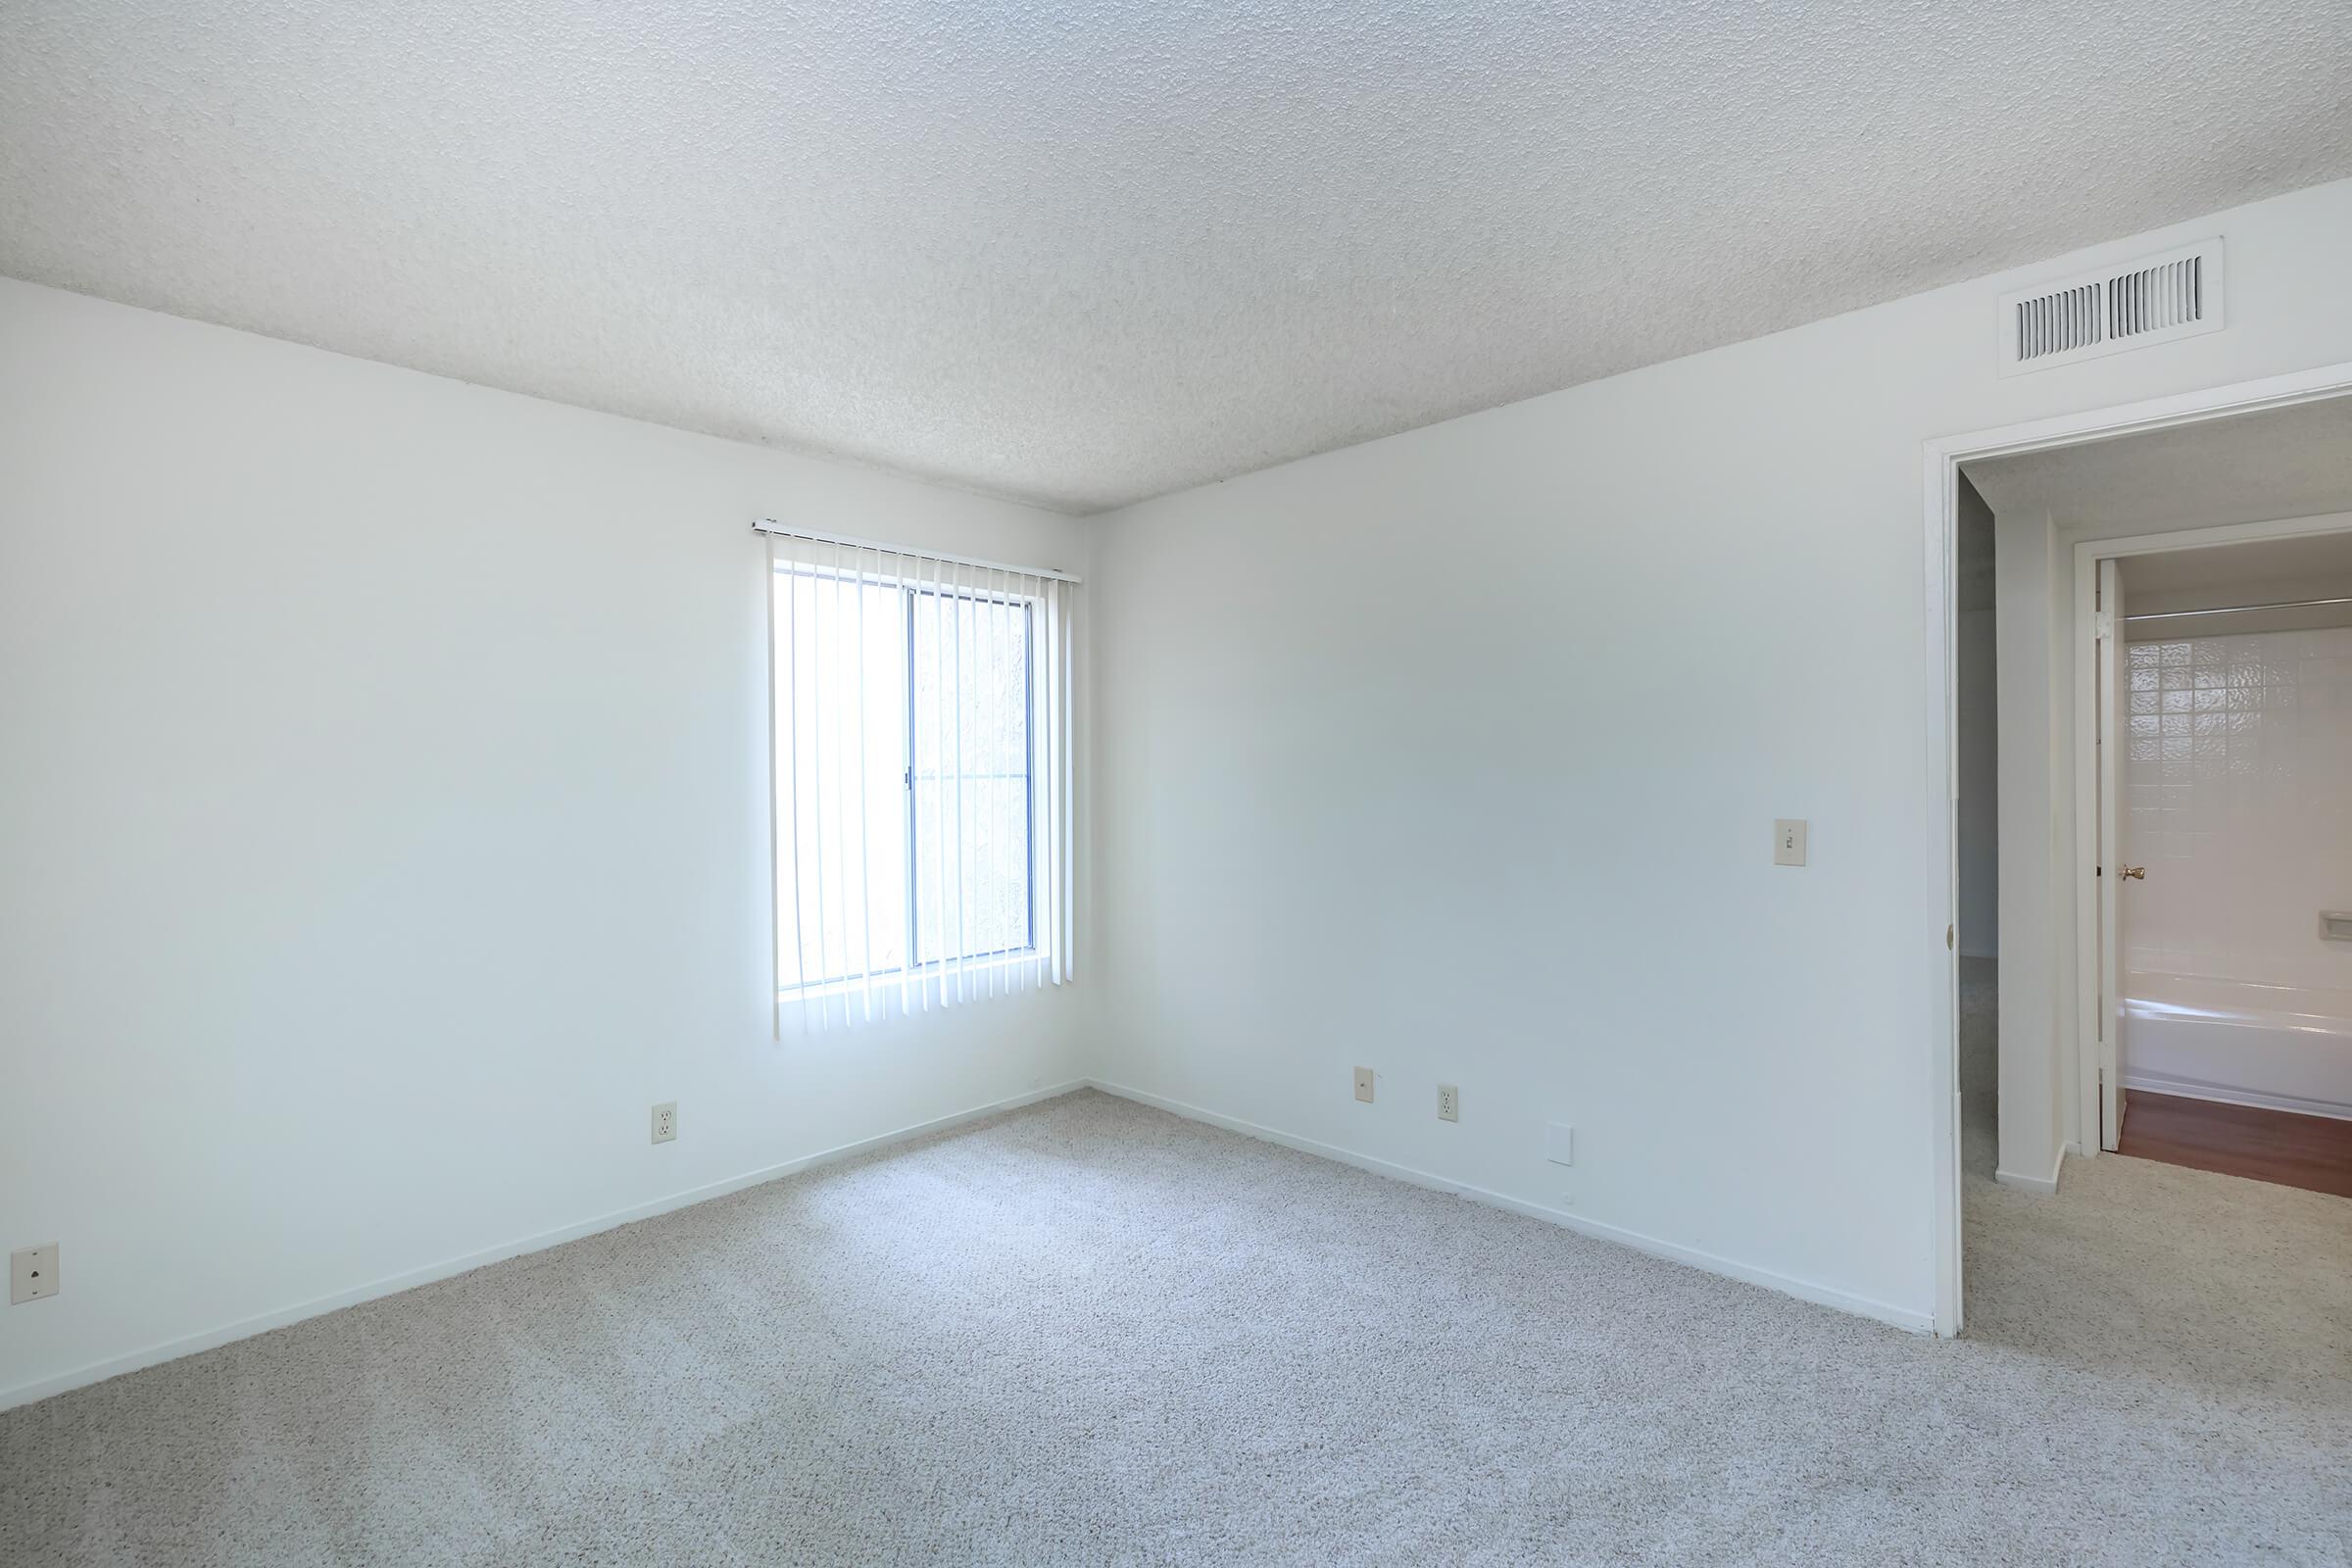 Bedroom with carpet